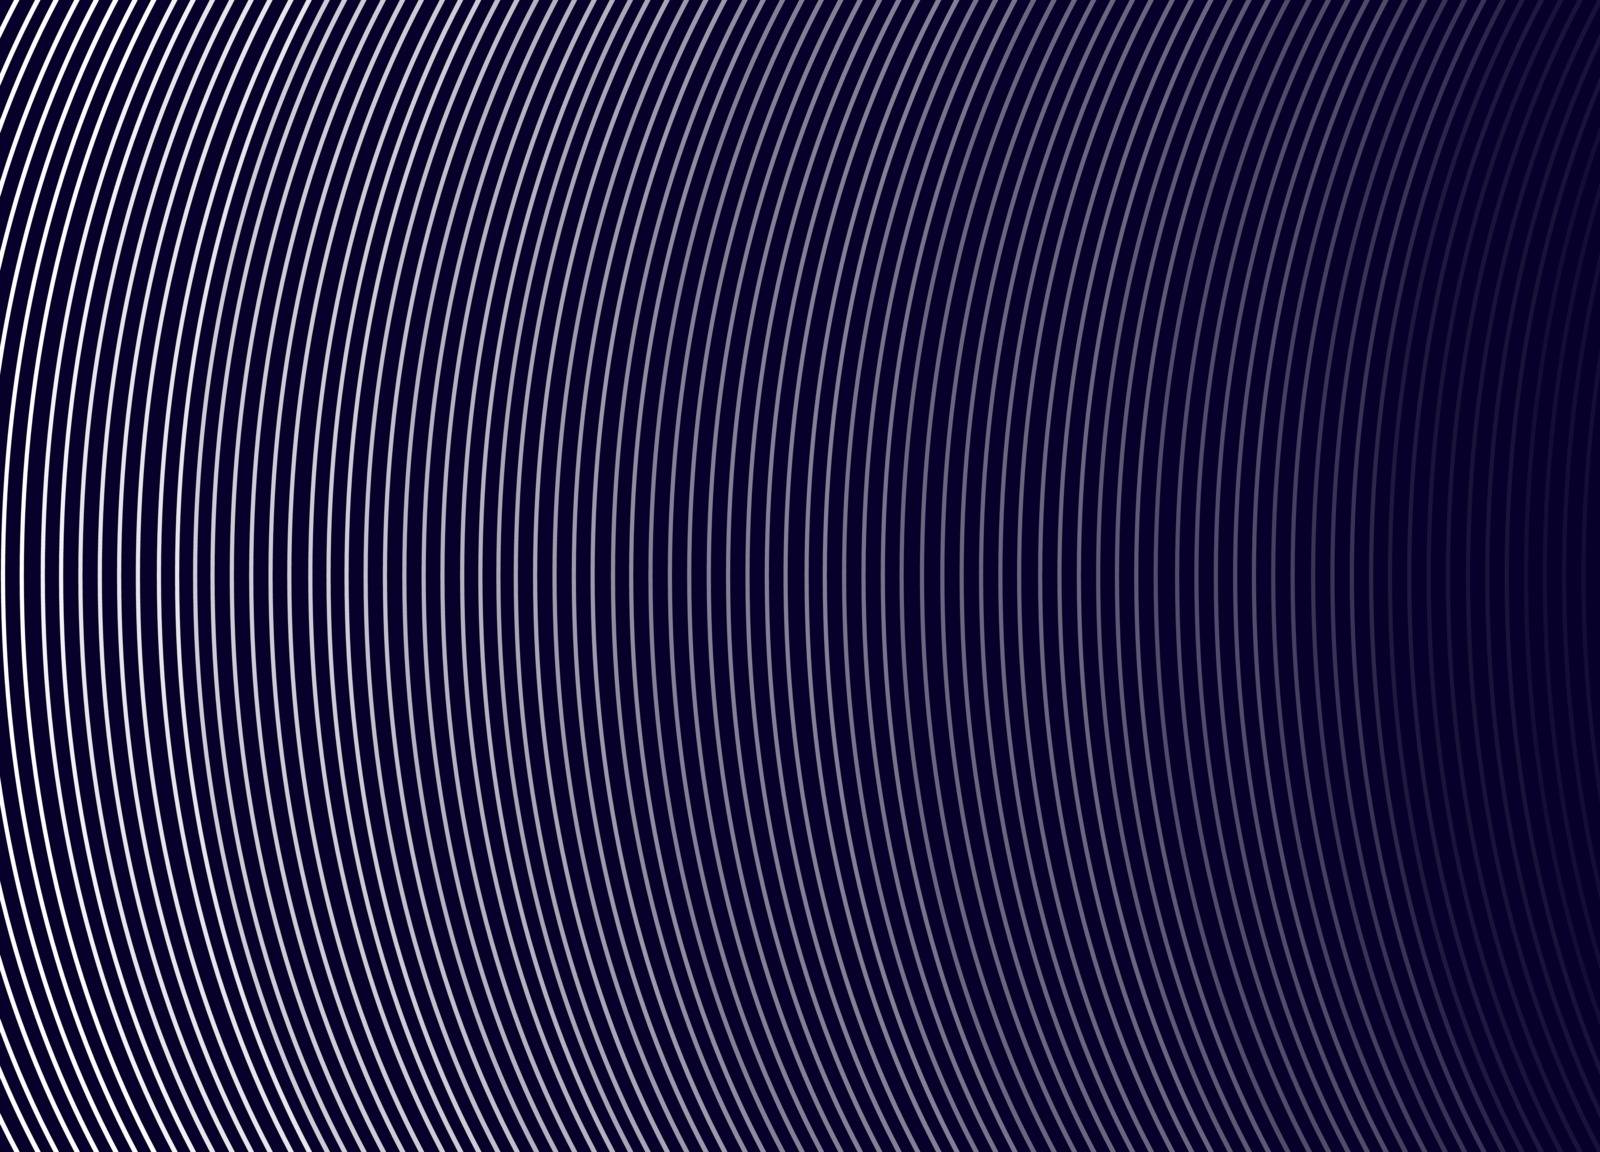 Abstract curve line on dark blue background.